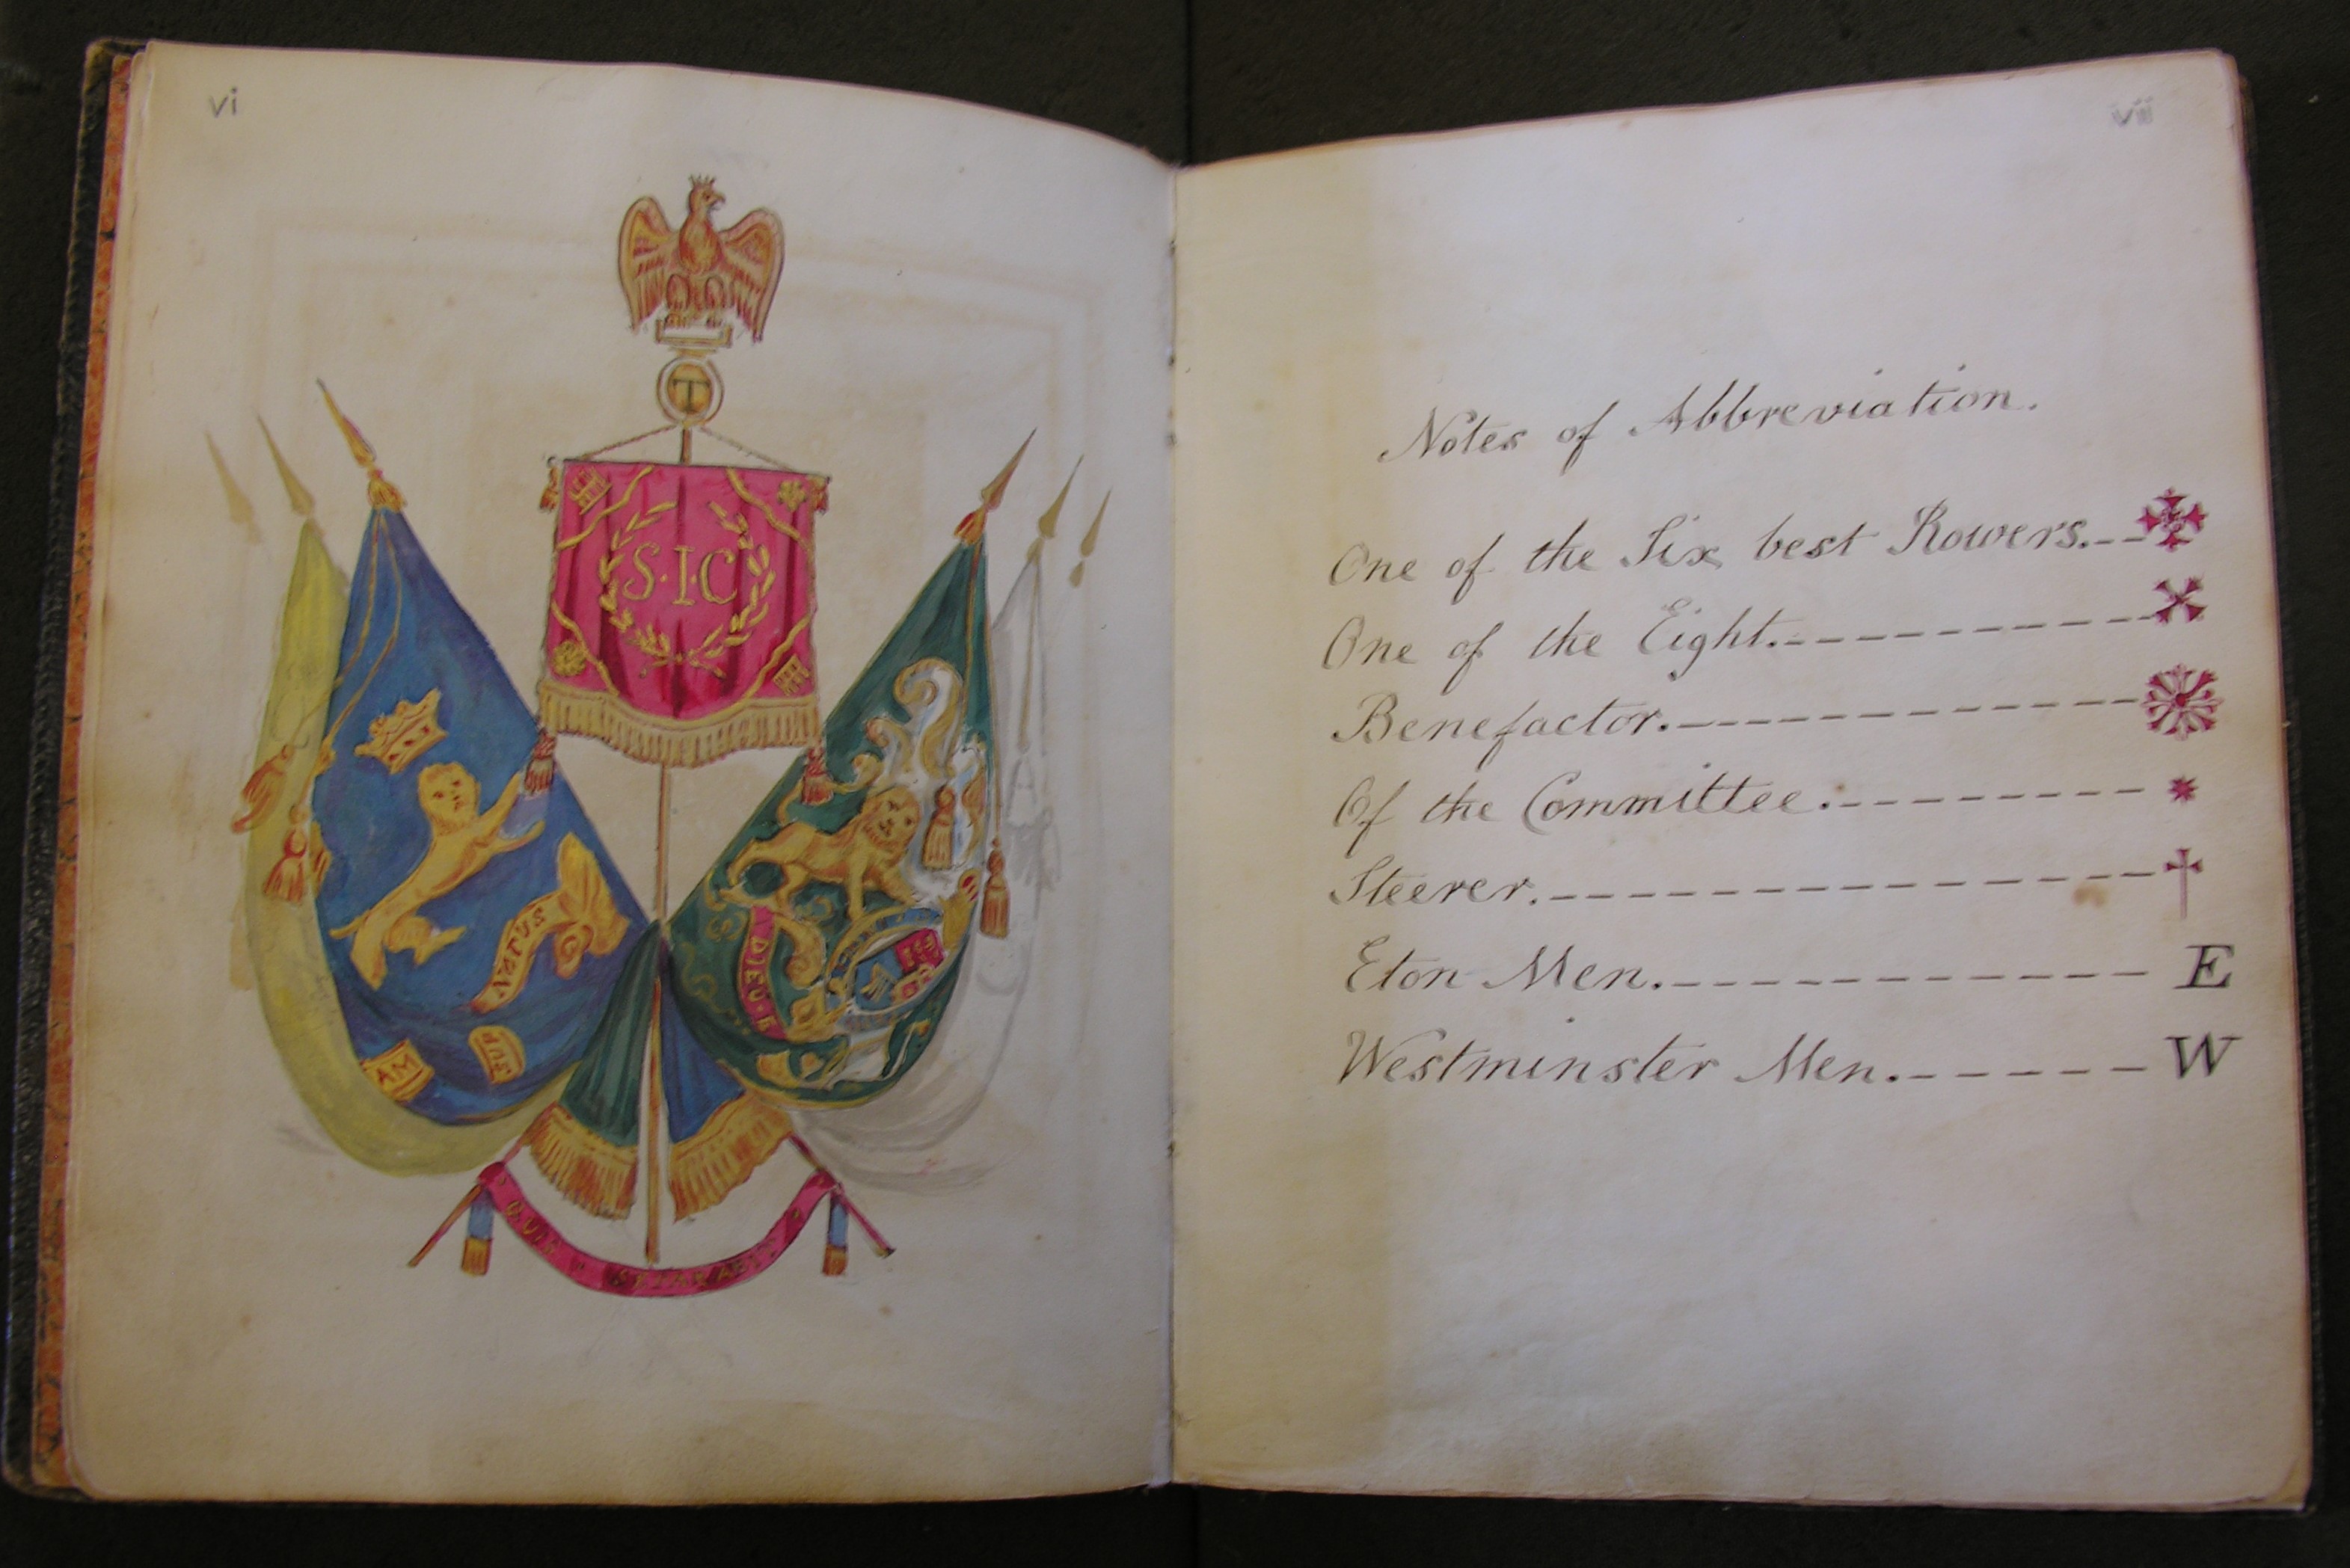 President's Book with picture of flags and list of abbreviations